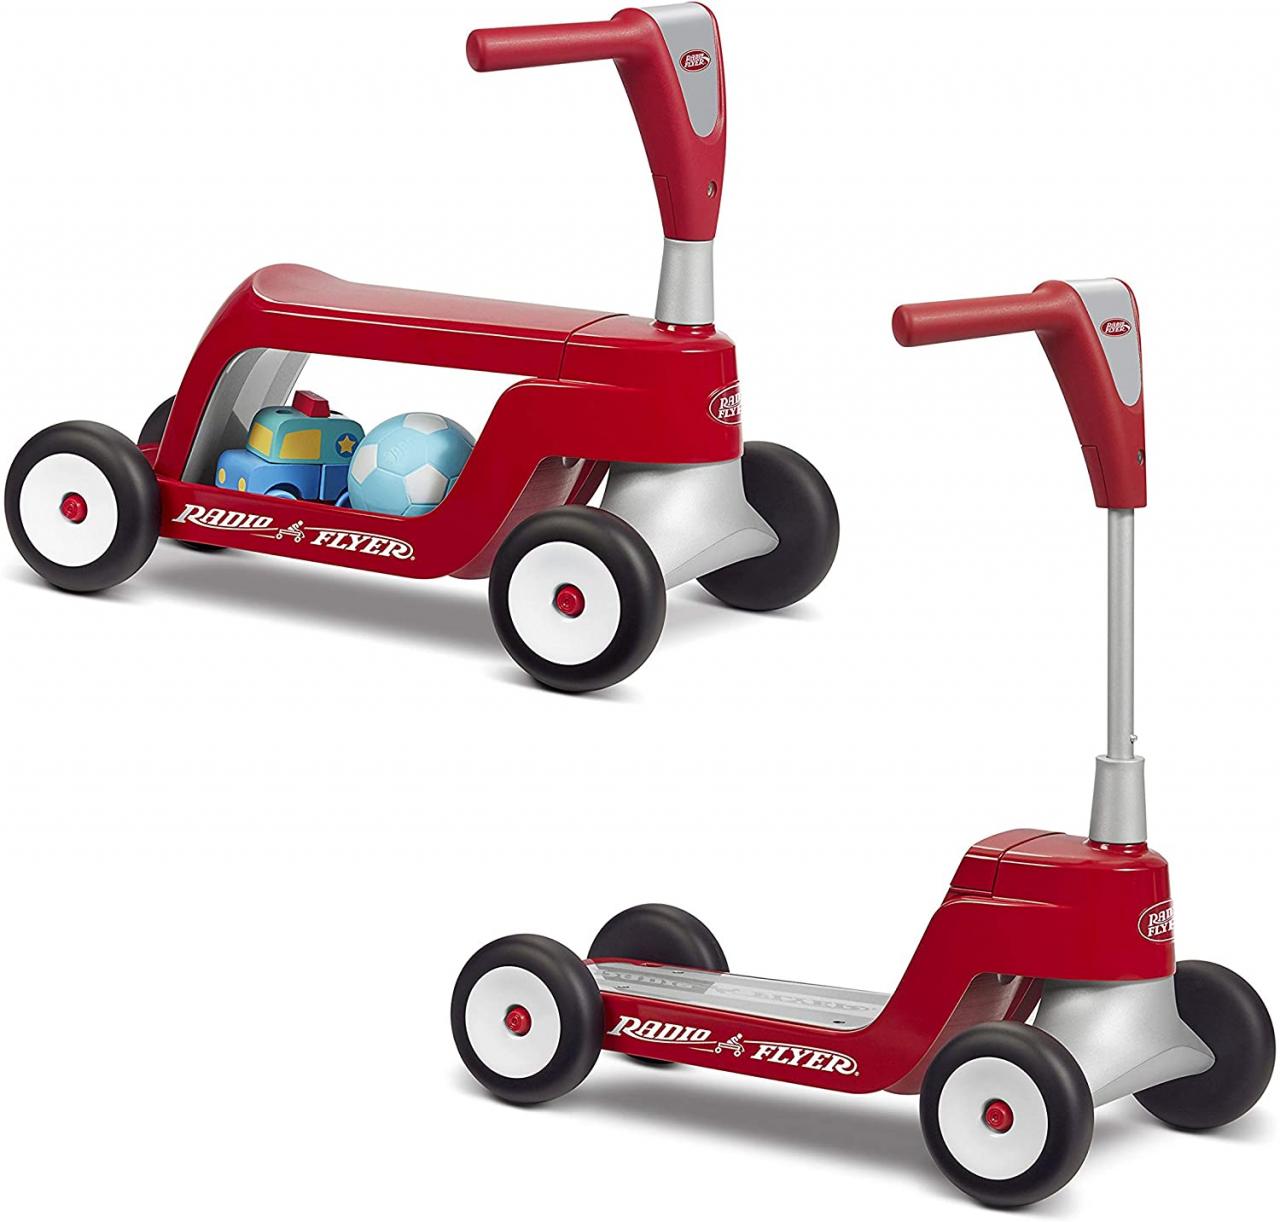 The Radio Flyer Scoot-About